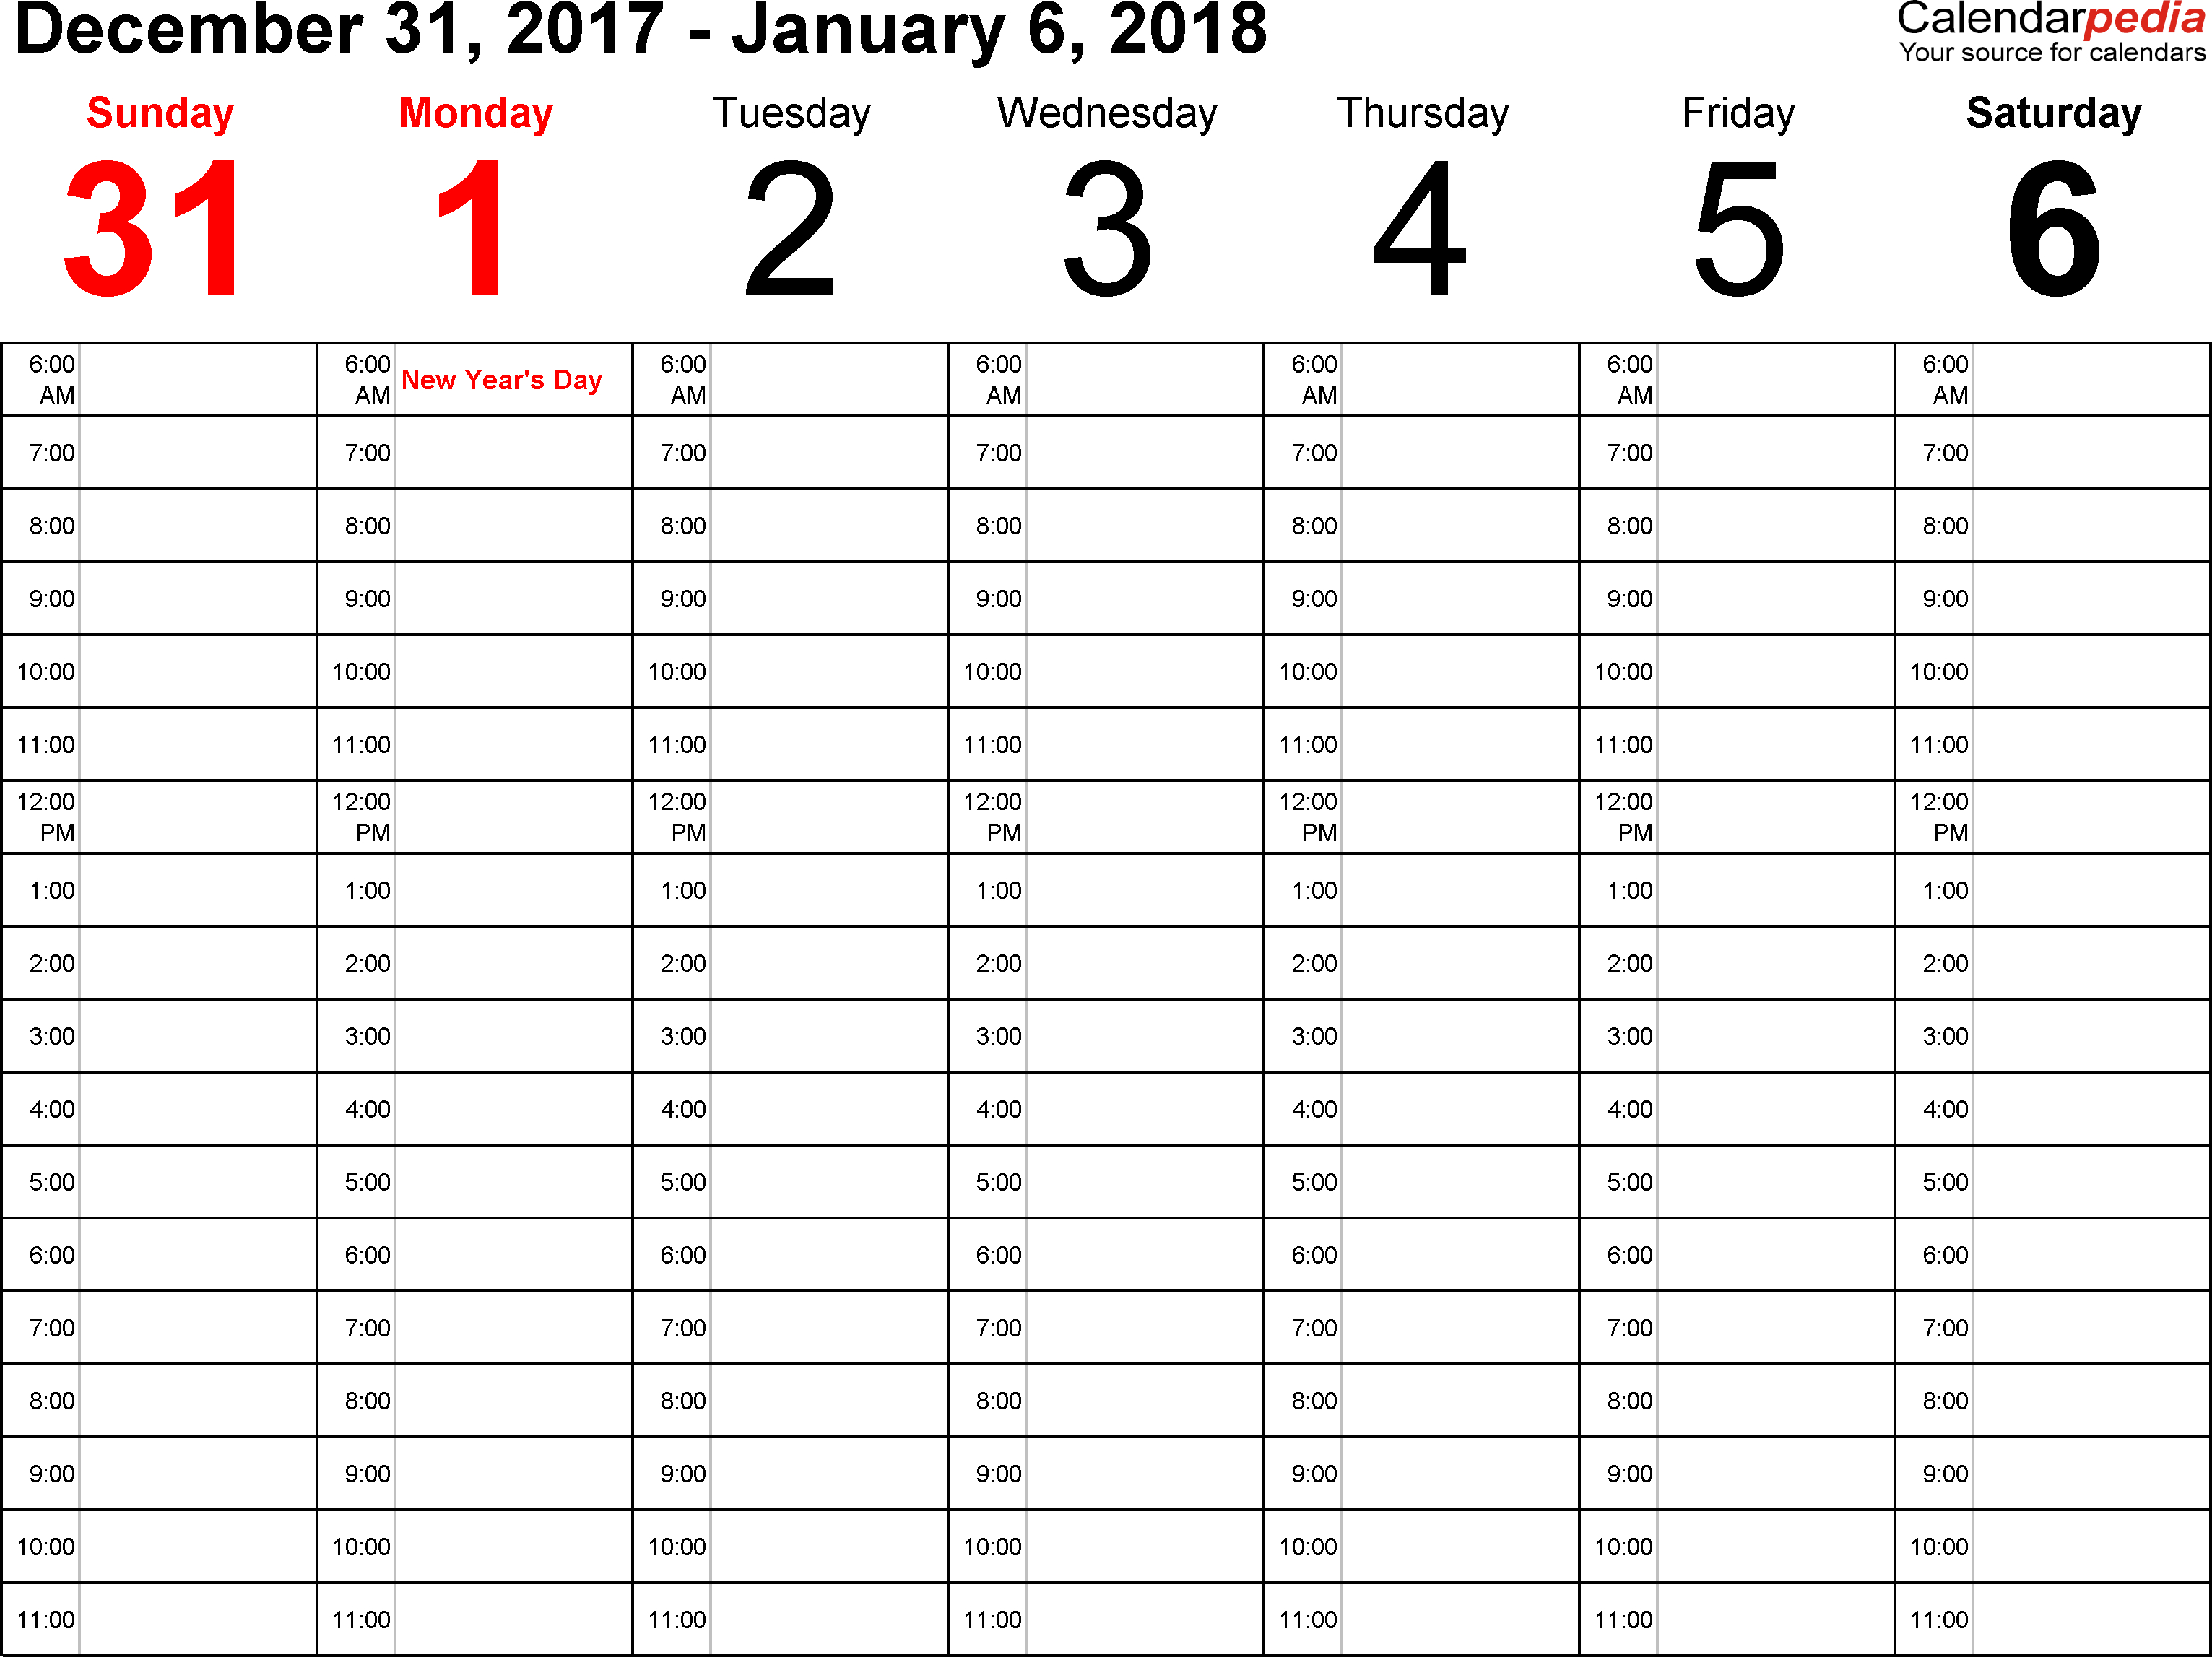 Weekly Calendars 2018 For Word - 12 Free Printable Templates